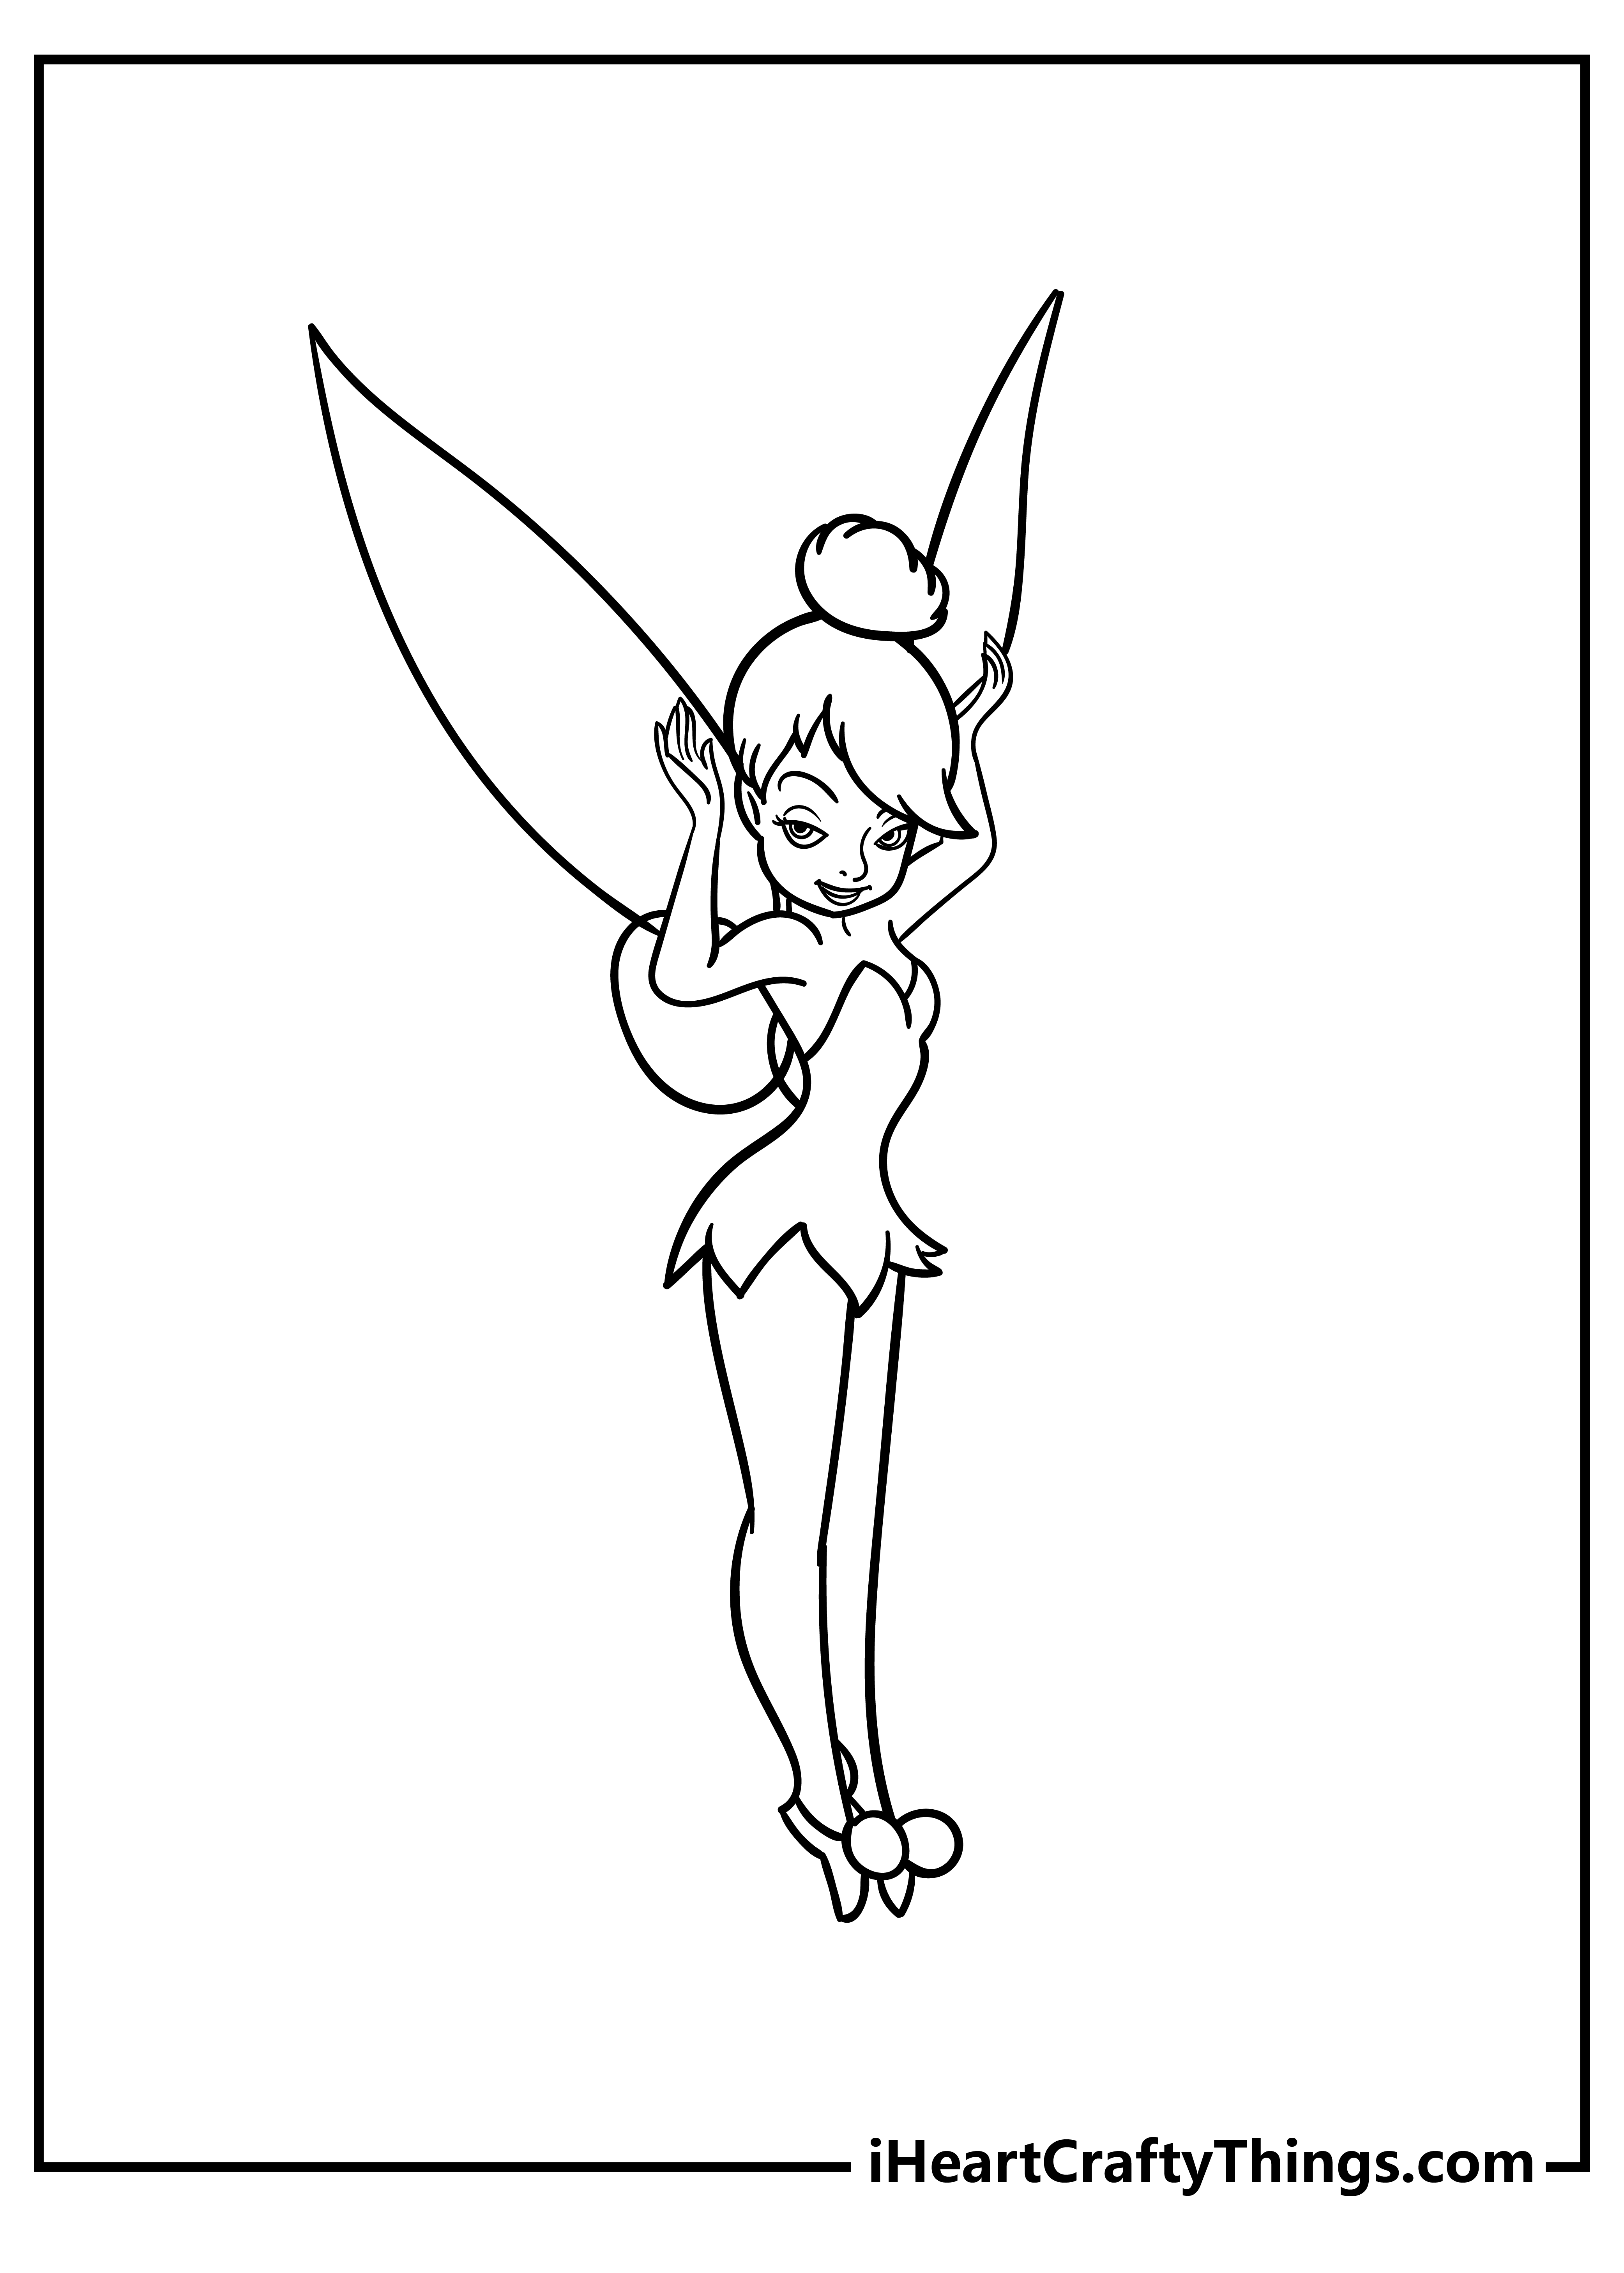 Tinkerbell Coloring Book for adults free download